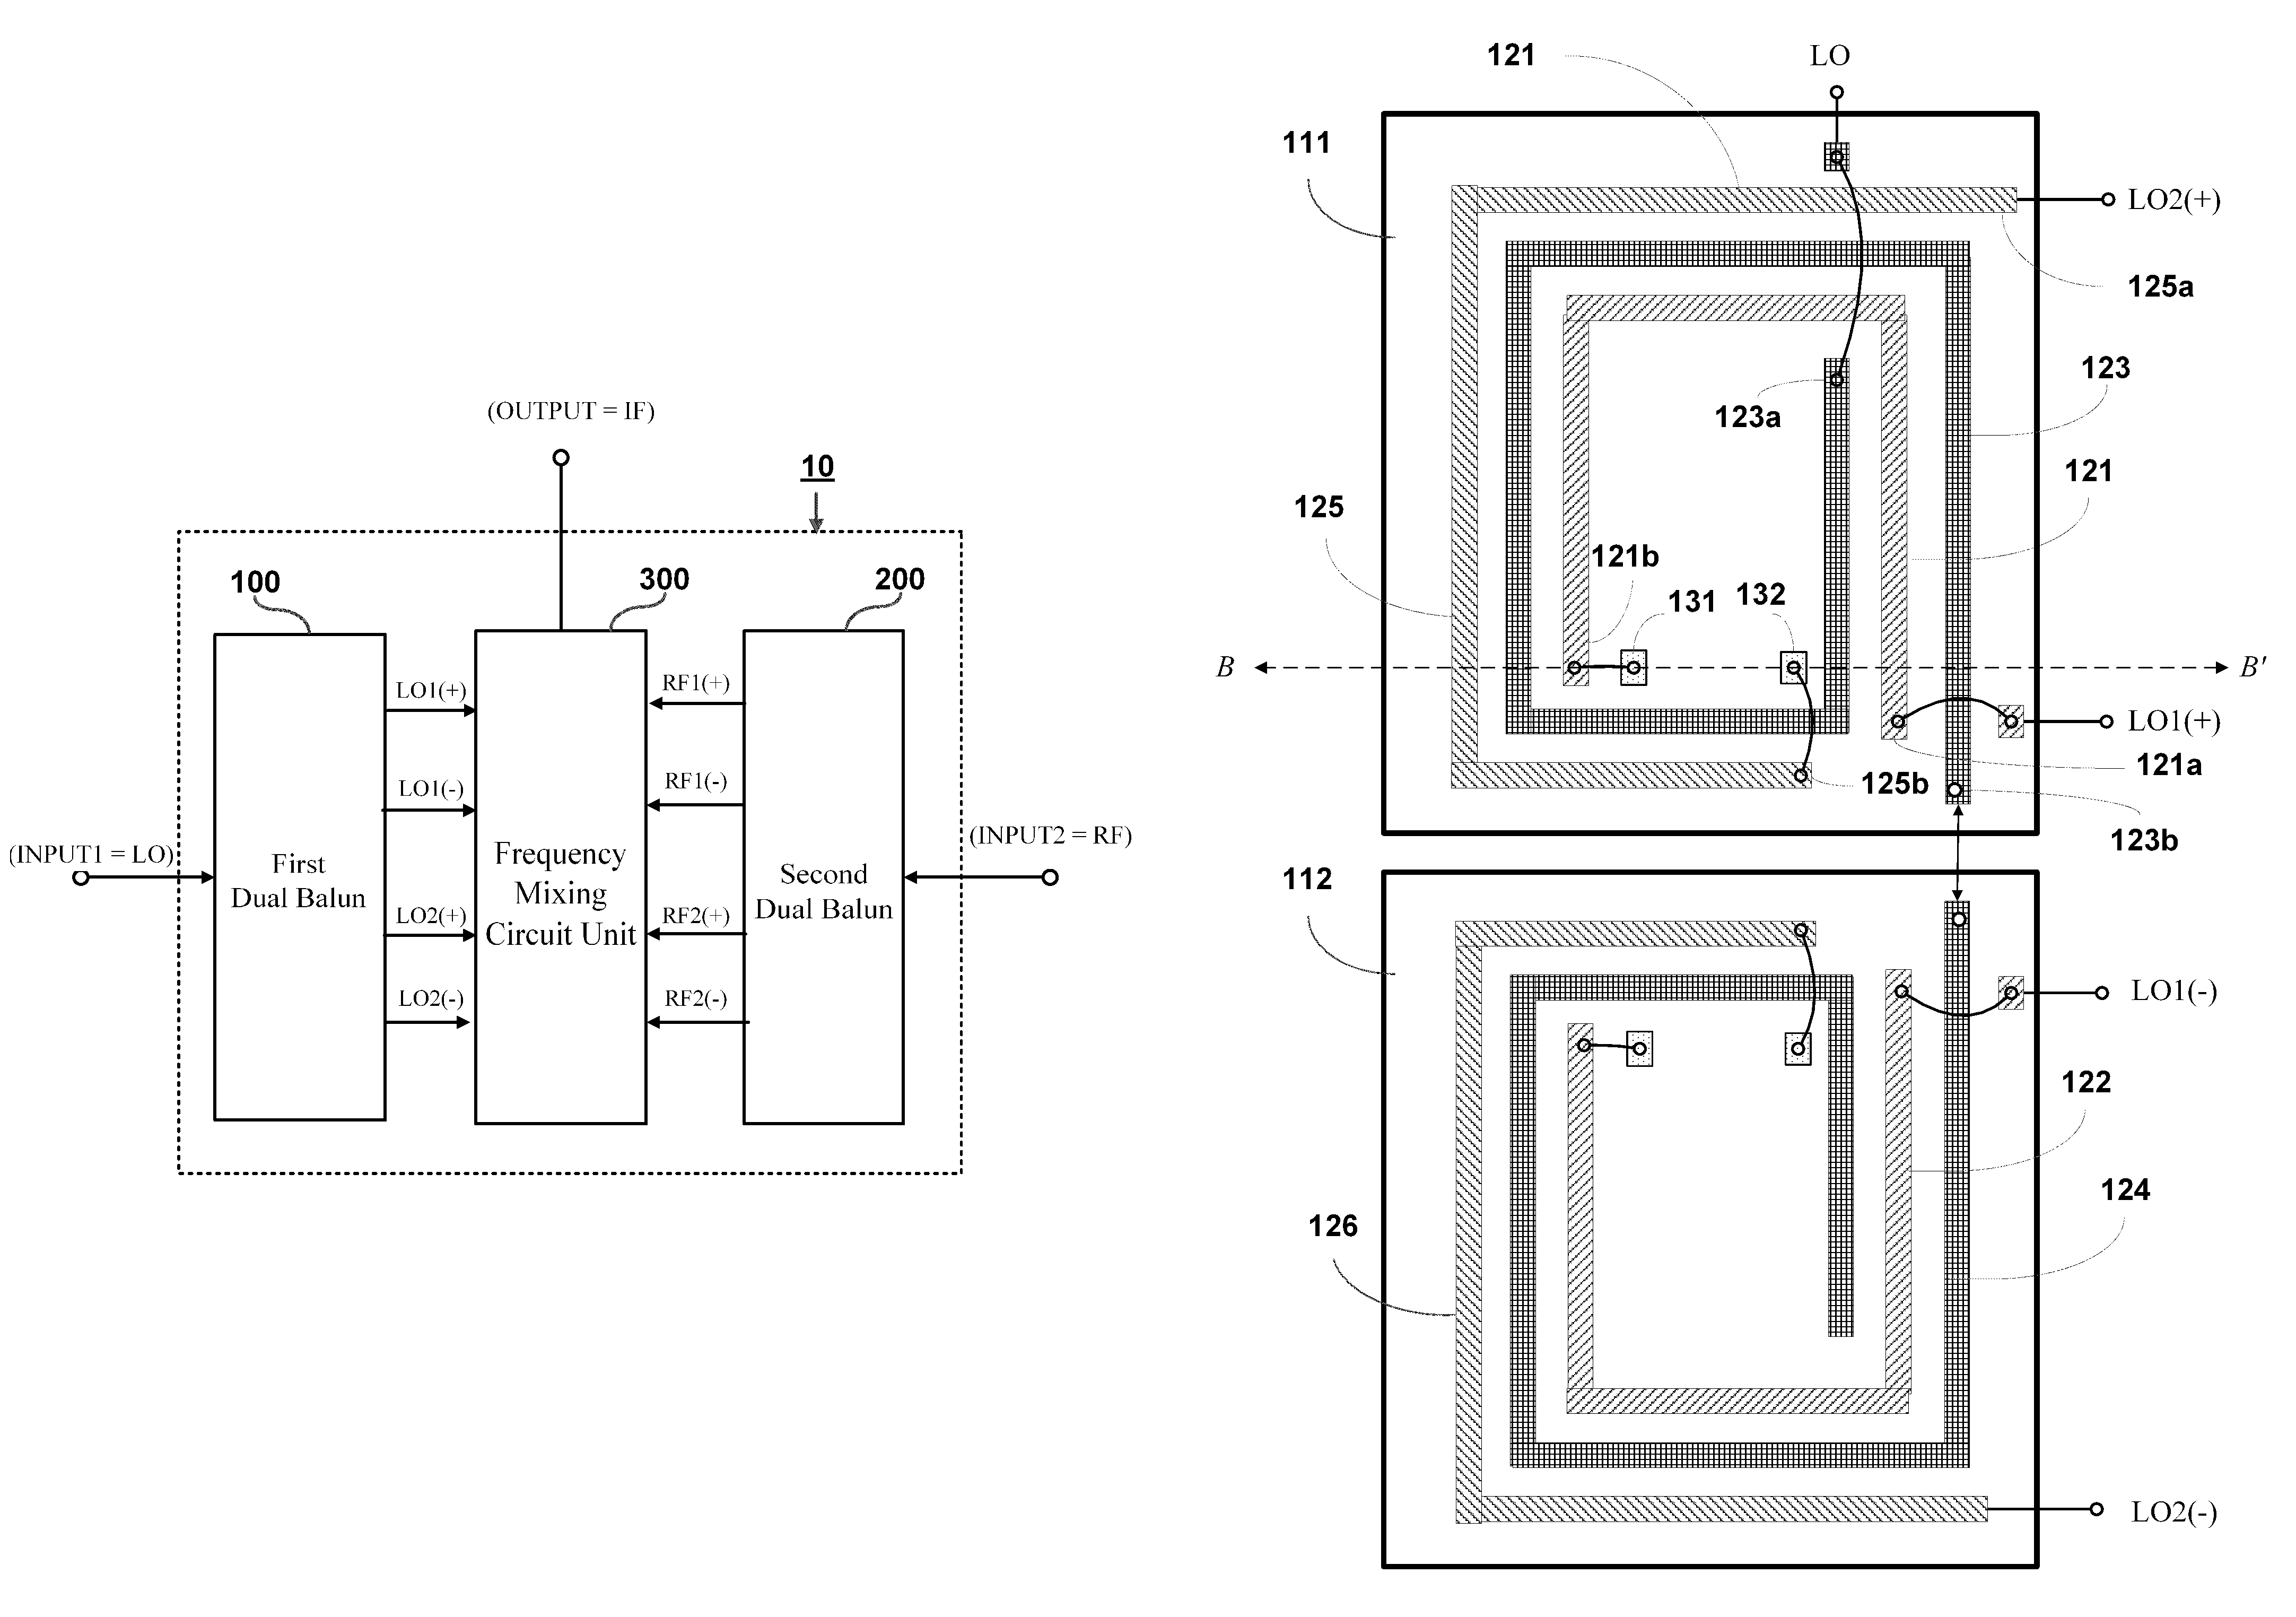 Miniaturized dual-balanced mixer circuit based on a double spiral layout architecture